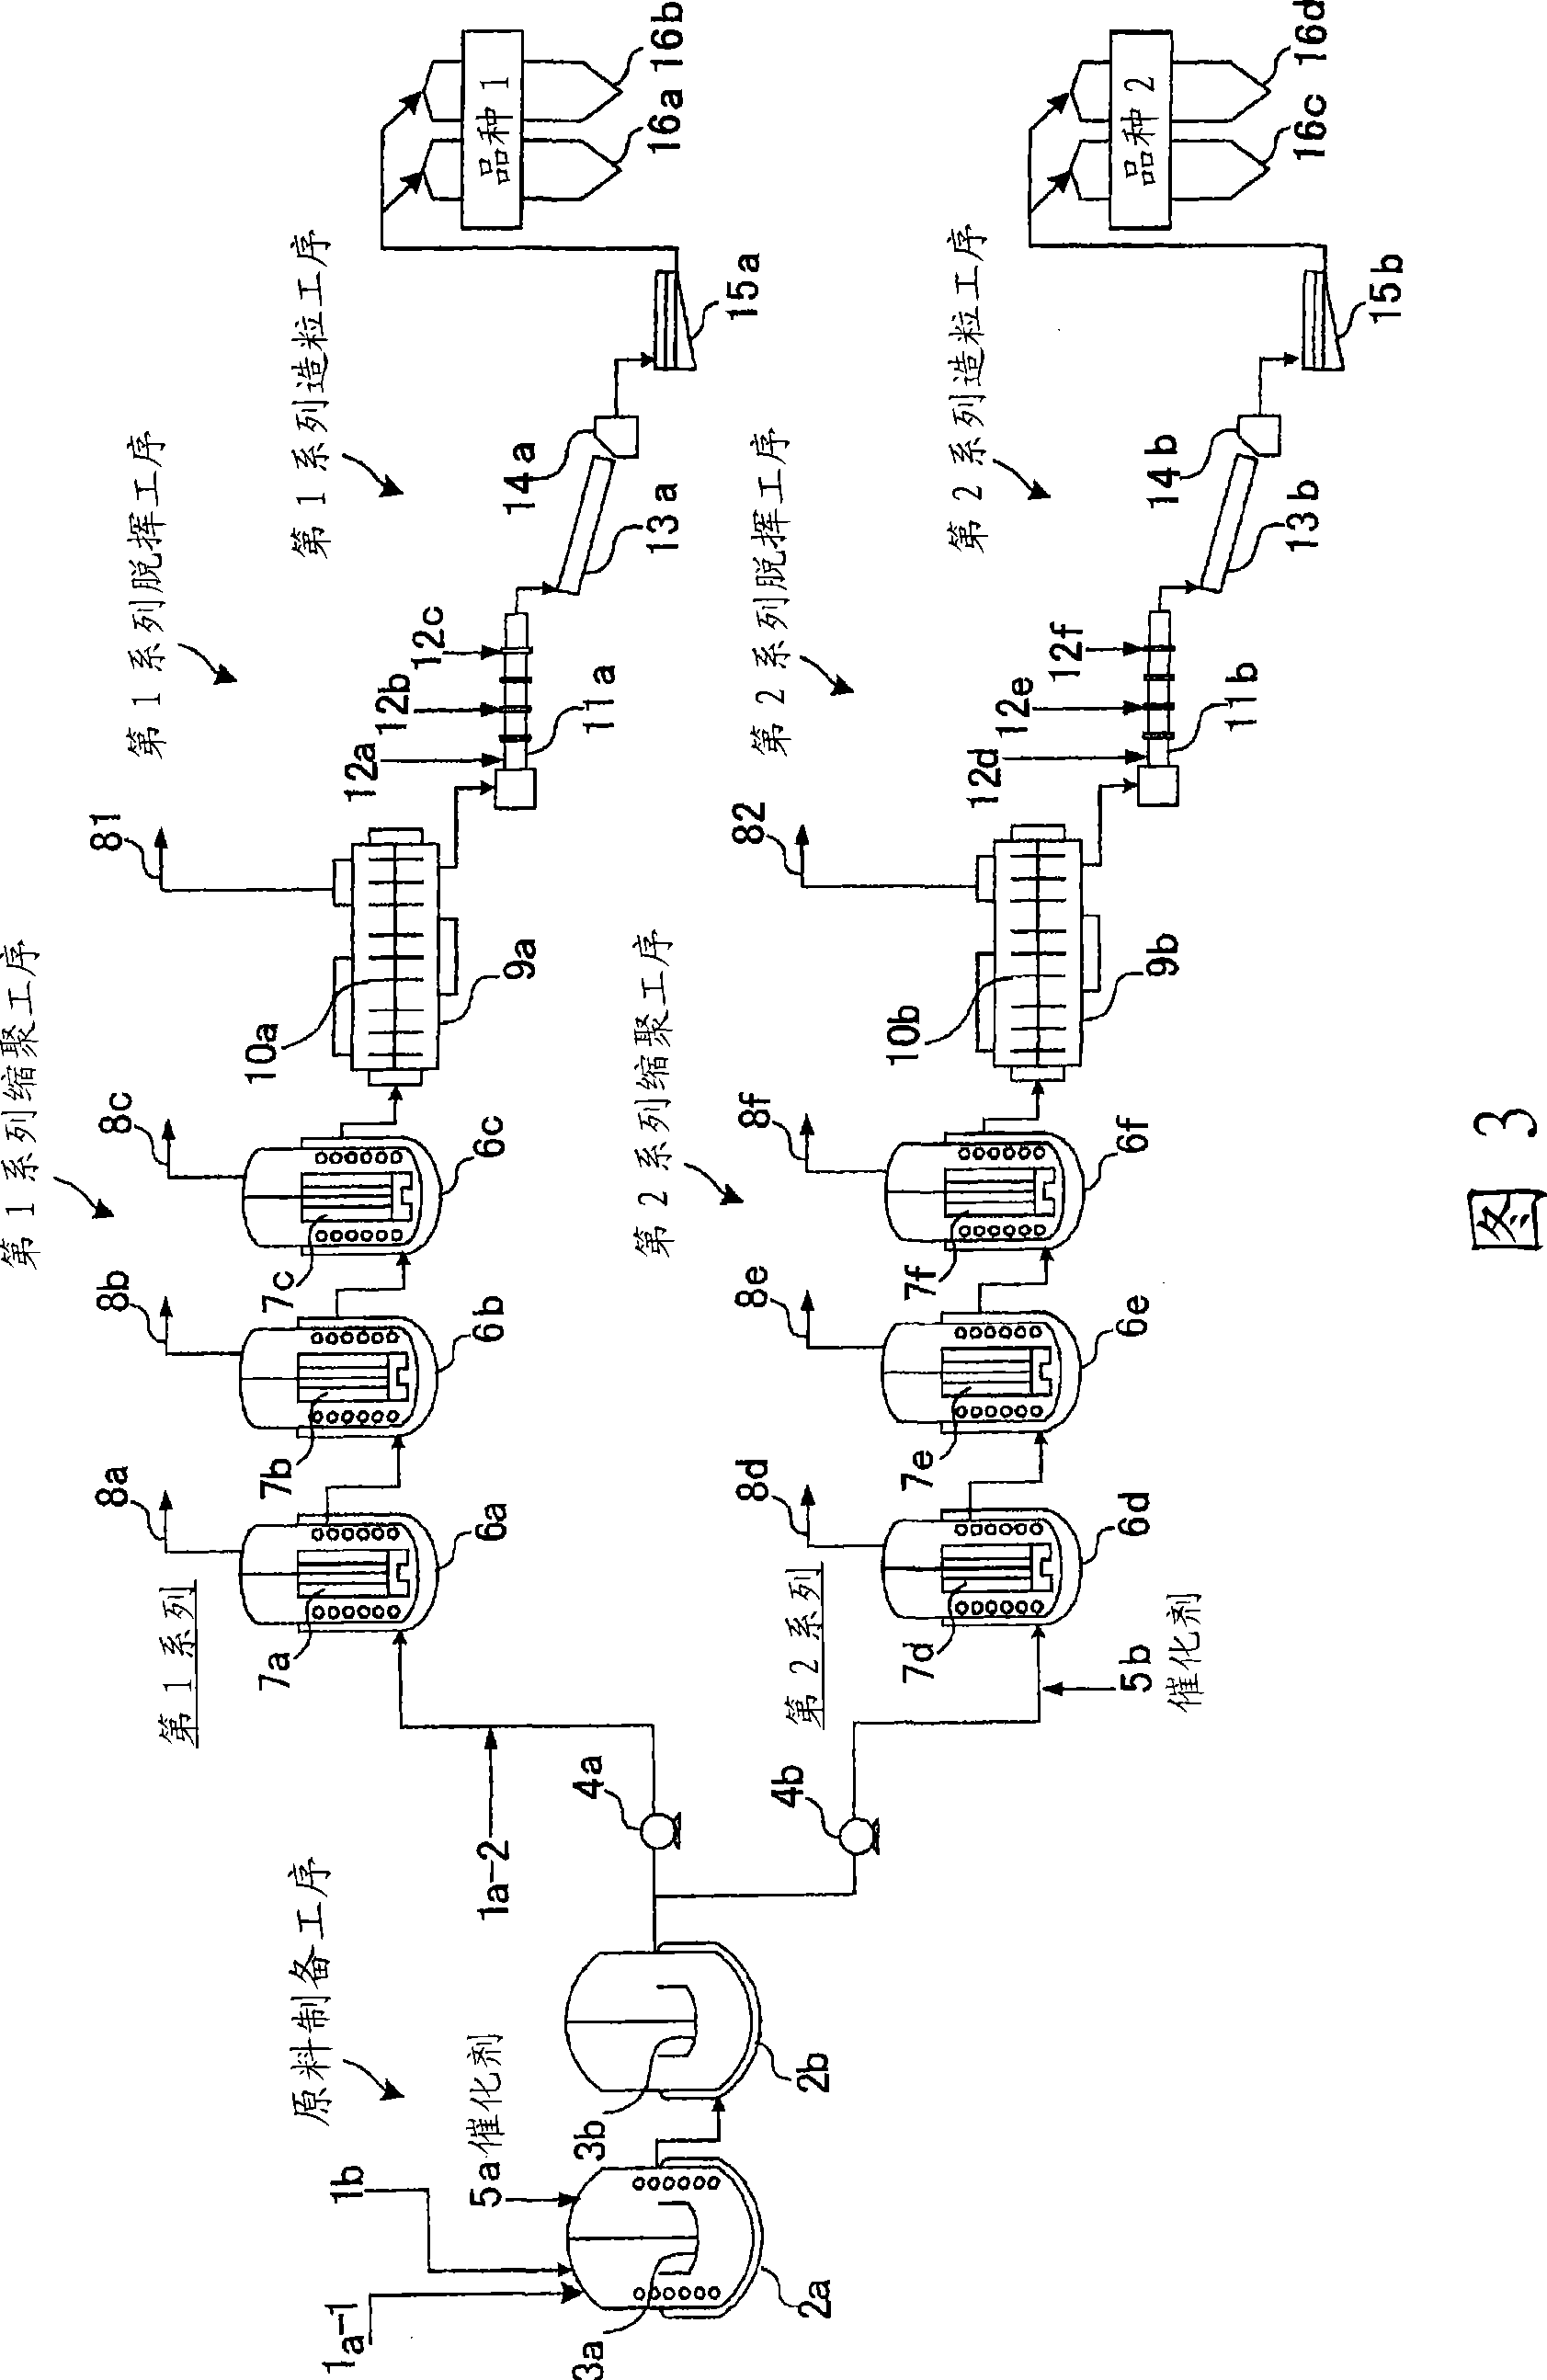 Process and apparatus for continuously producing aromatic polycarbonate